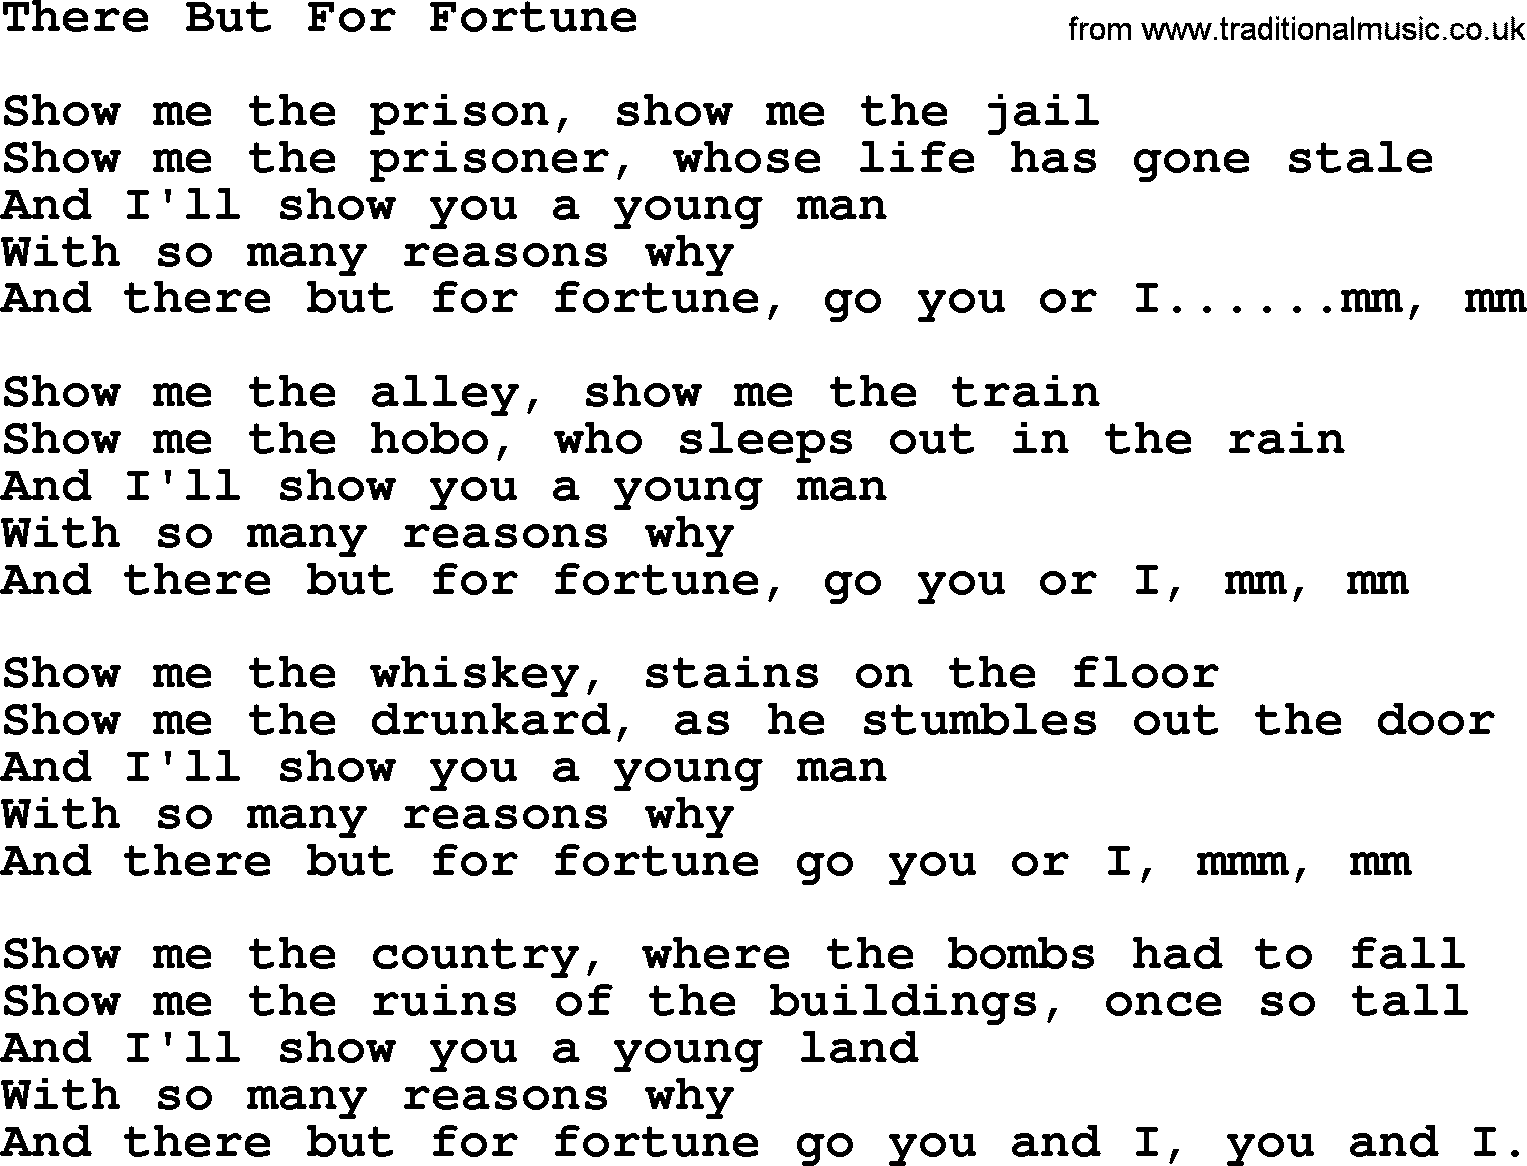 Joan Baez song There But For Fortune, lyrics